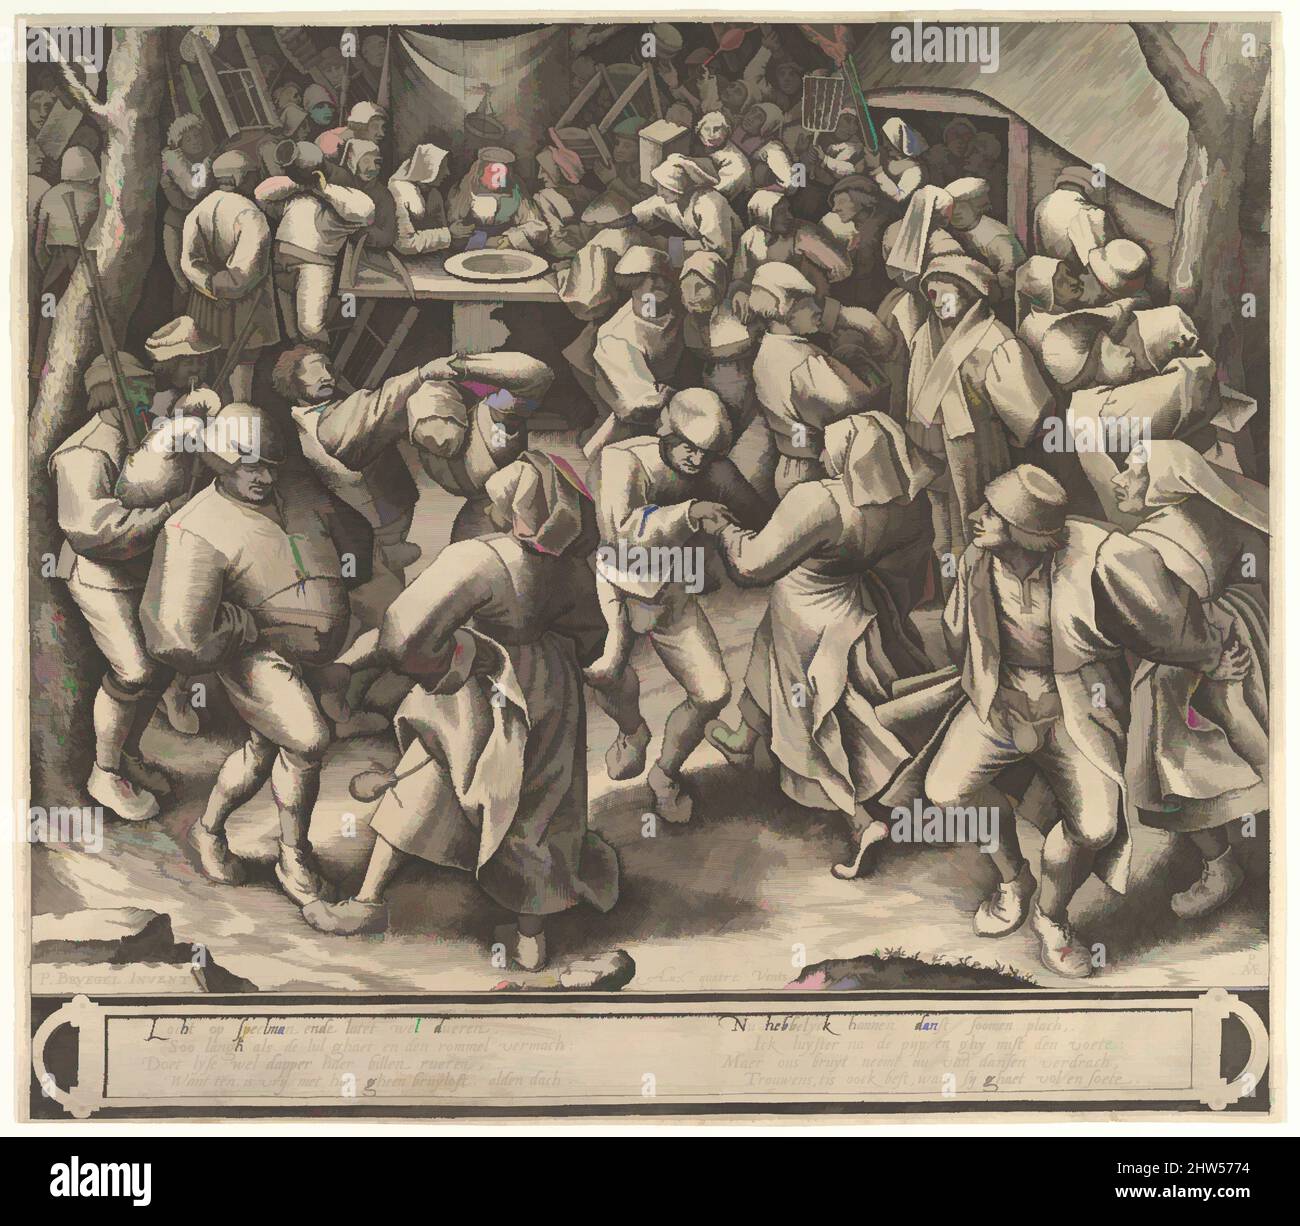 Art inspired by The Peasant Wedding Dance, after 1570, Engraving; first state of three, sheet: 14 15/16 x 17 1/16 in. (38 x 43.3 cm), Prints, Pieter van der Heyden (Netherlandish, ca. 1525–1569), After Pieter Bruegel the Elder (Netherlandish, Breda (?) ca. 1525–1569 Brussels, Classic works modernized by Artotop with a splash of modernity. Shapes, color and value, eye-catching visual impact on art. Emotions through freedom of artworks in a contemporary way. A timeless message pursuing a wildly creative new direction. Artists turning to the digital medium and creating the Artotop NFT Stock Photo